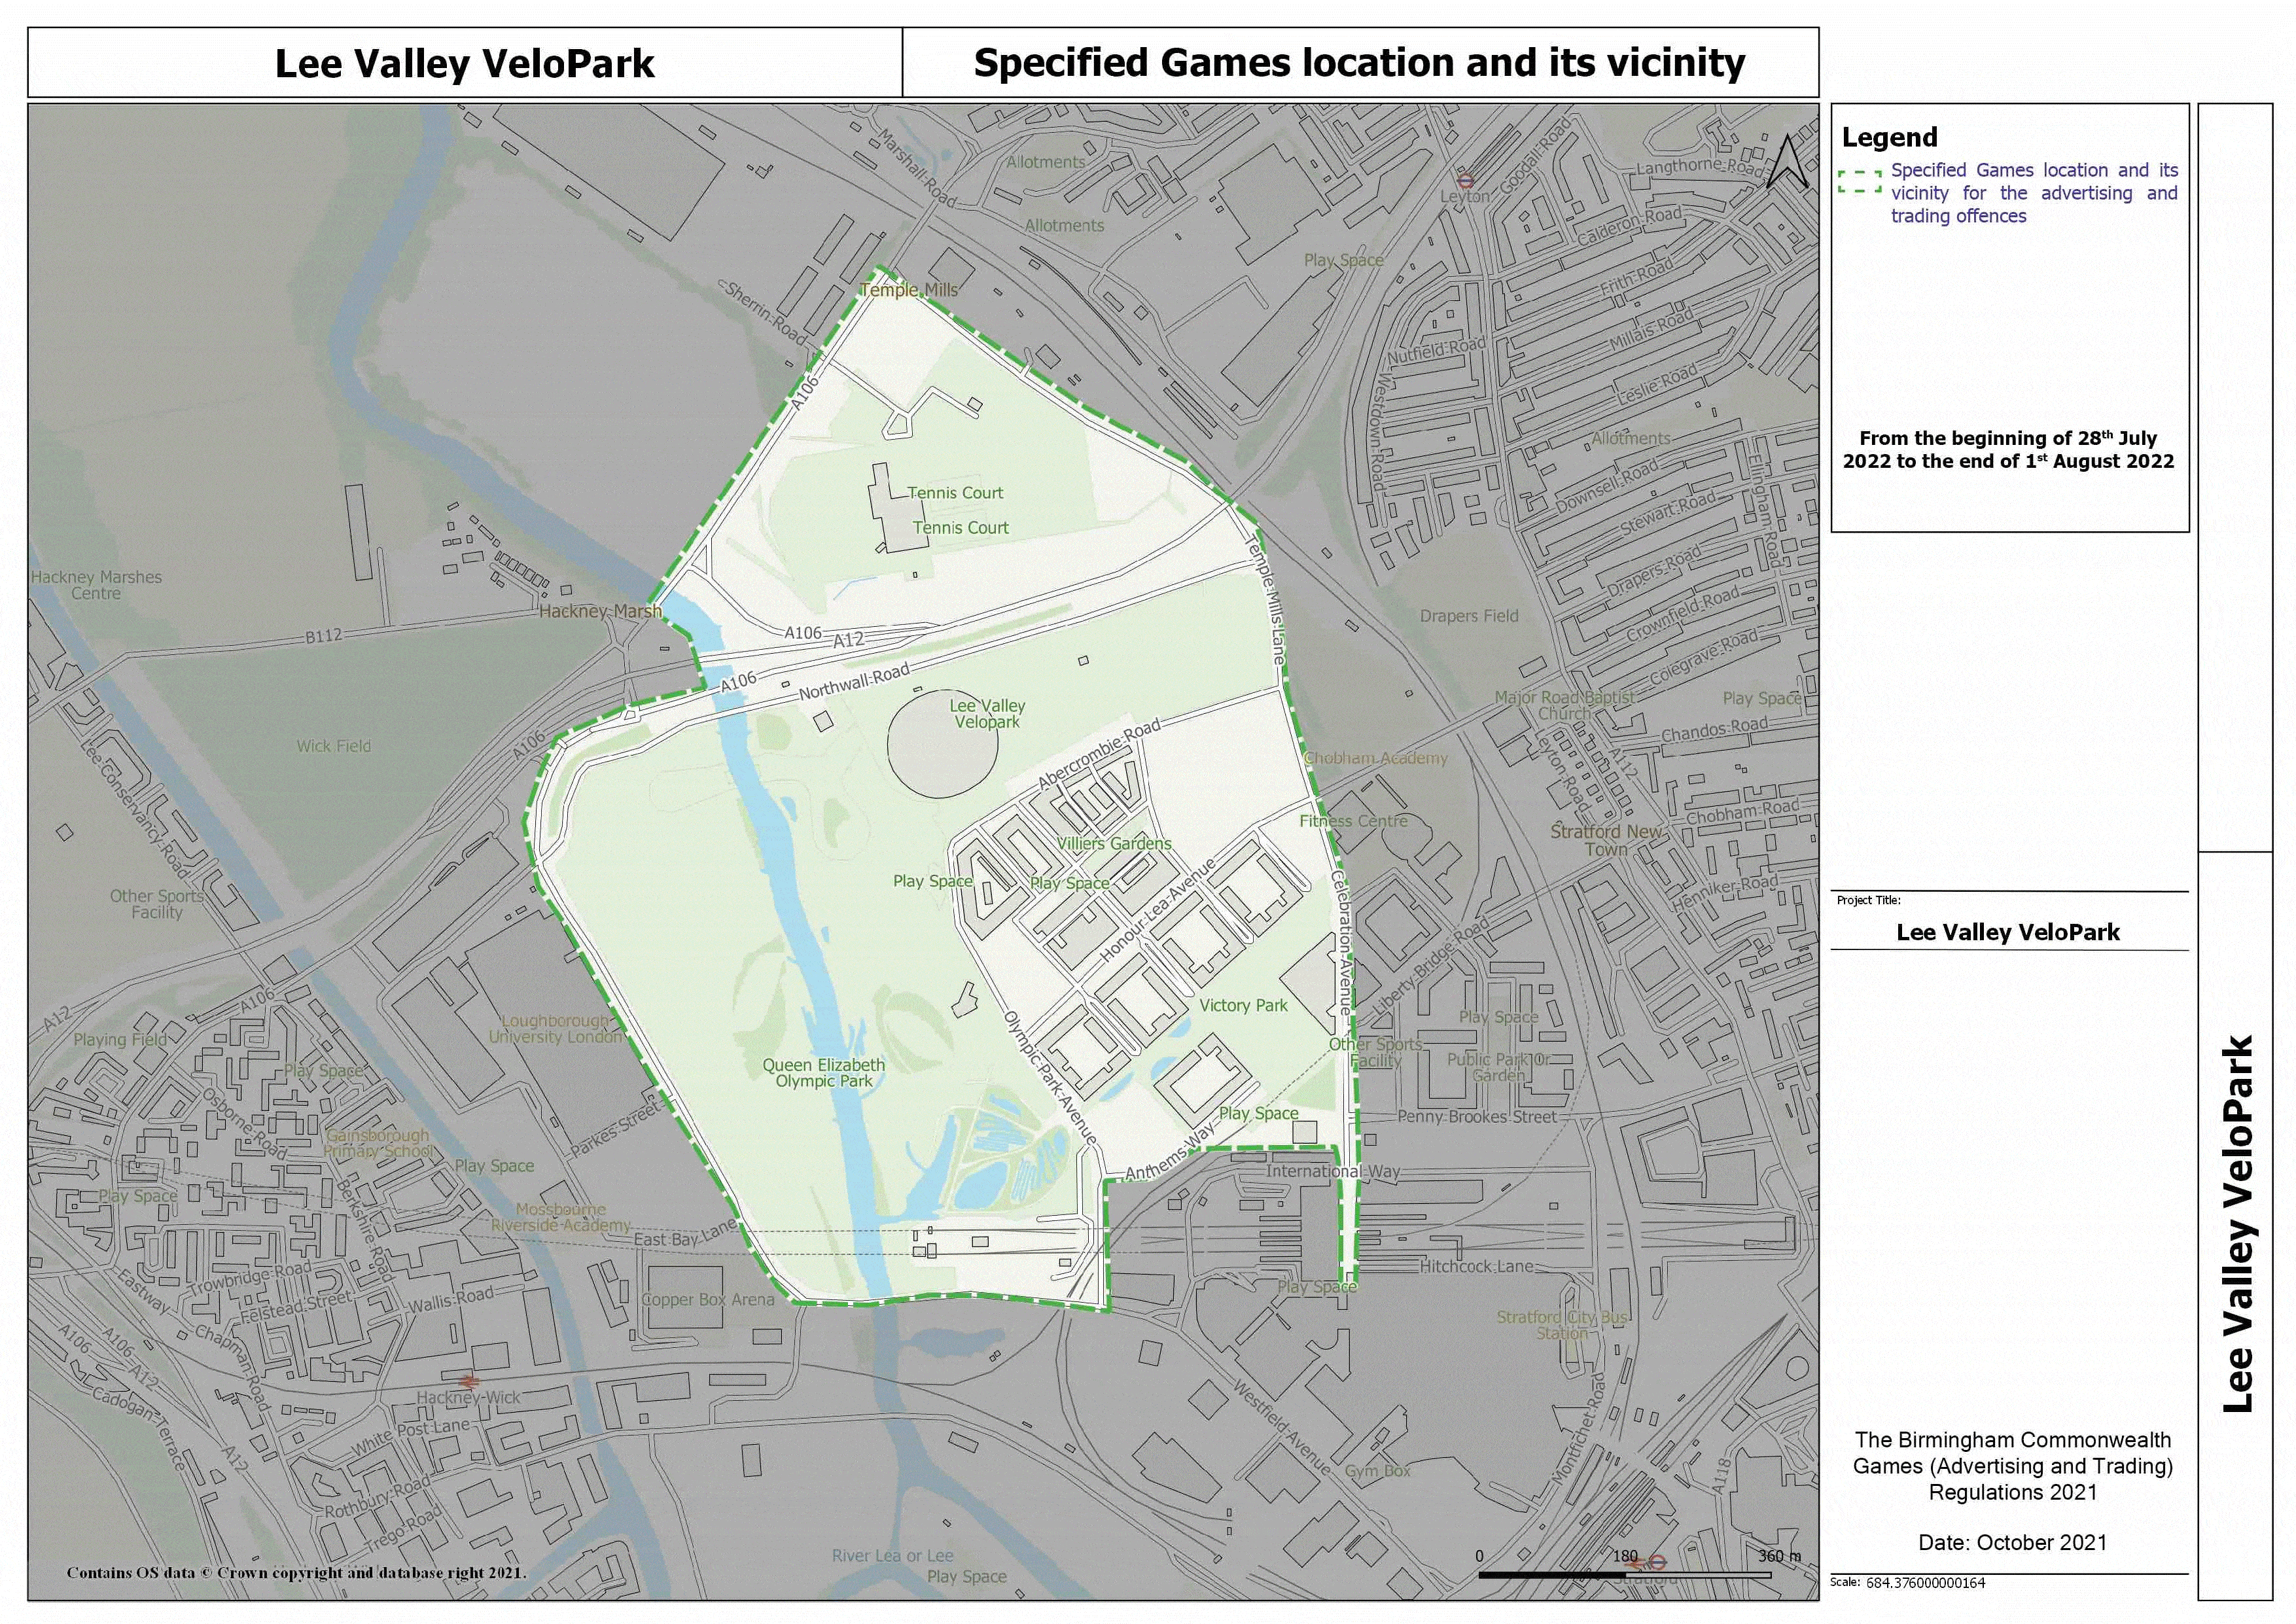 Map titled "Lee Valley VeloPark". One of the relevant maps for the purposes of the Birmingham Commonwealth Games (Advertising and Trading) Regulations 2021.
